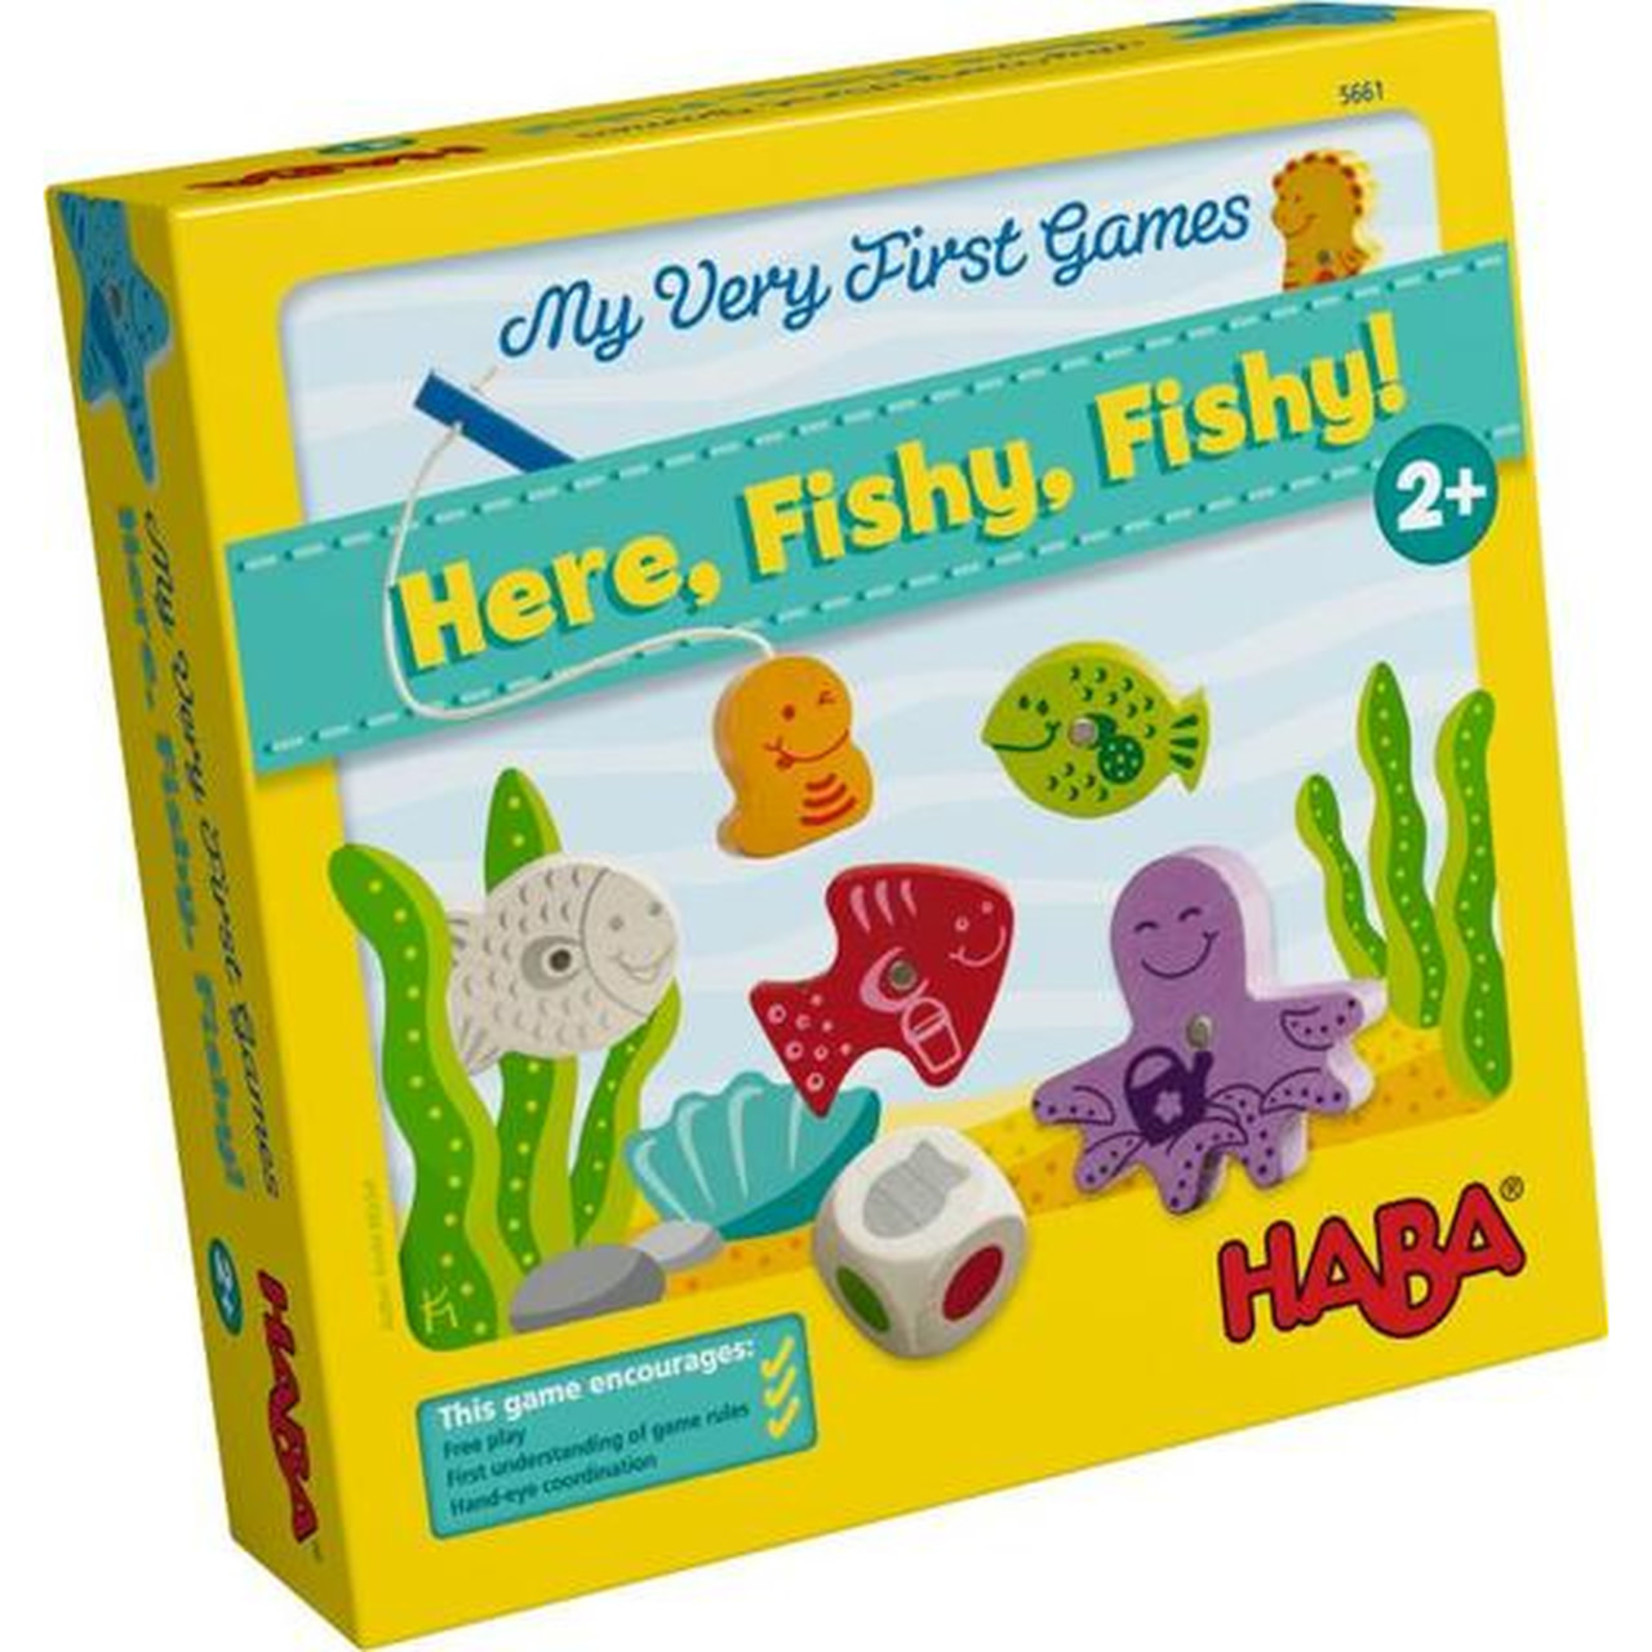 Haba My Very First Games: Here, Fishy, Fishy!